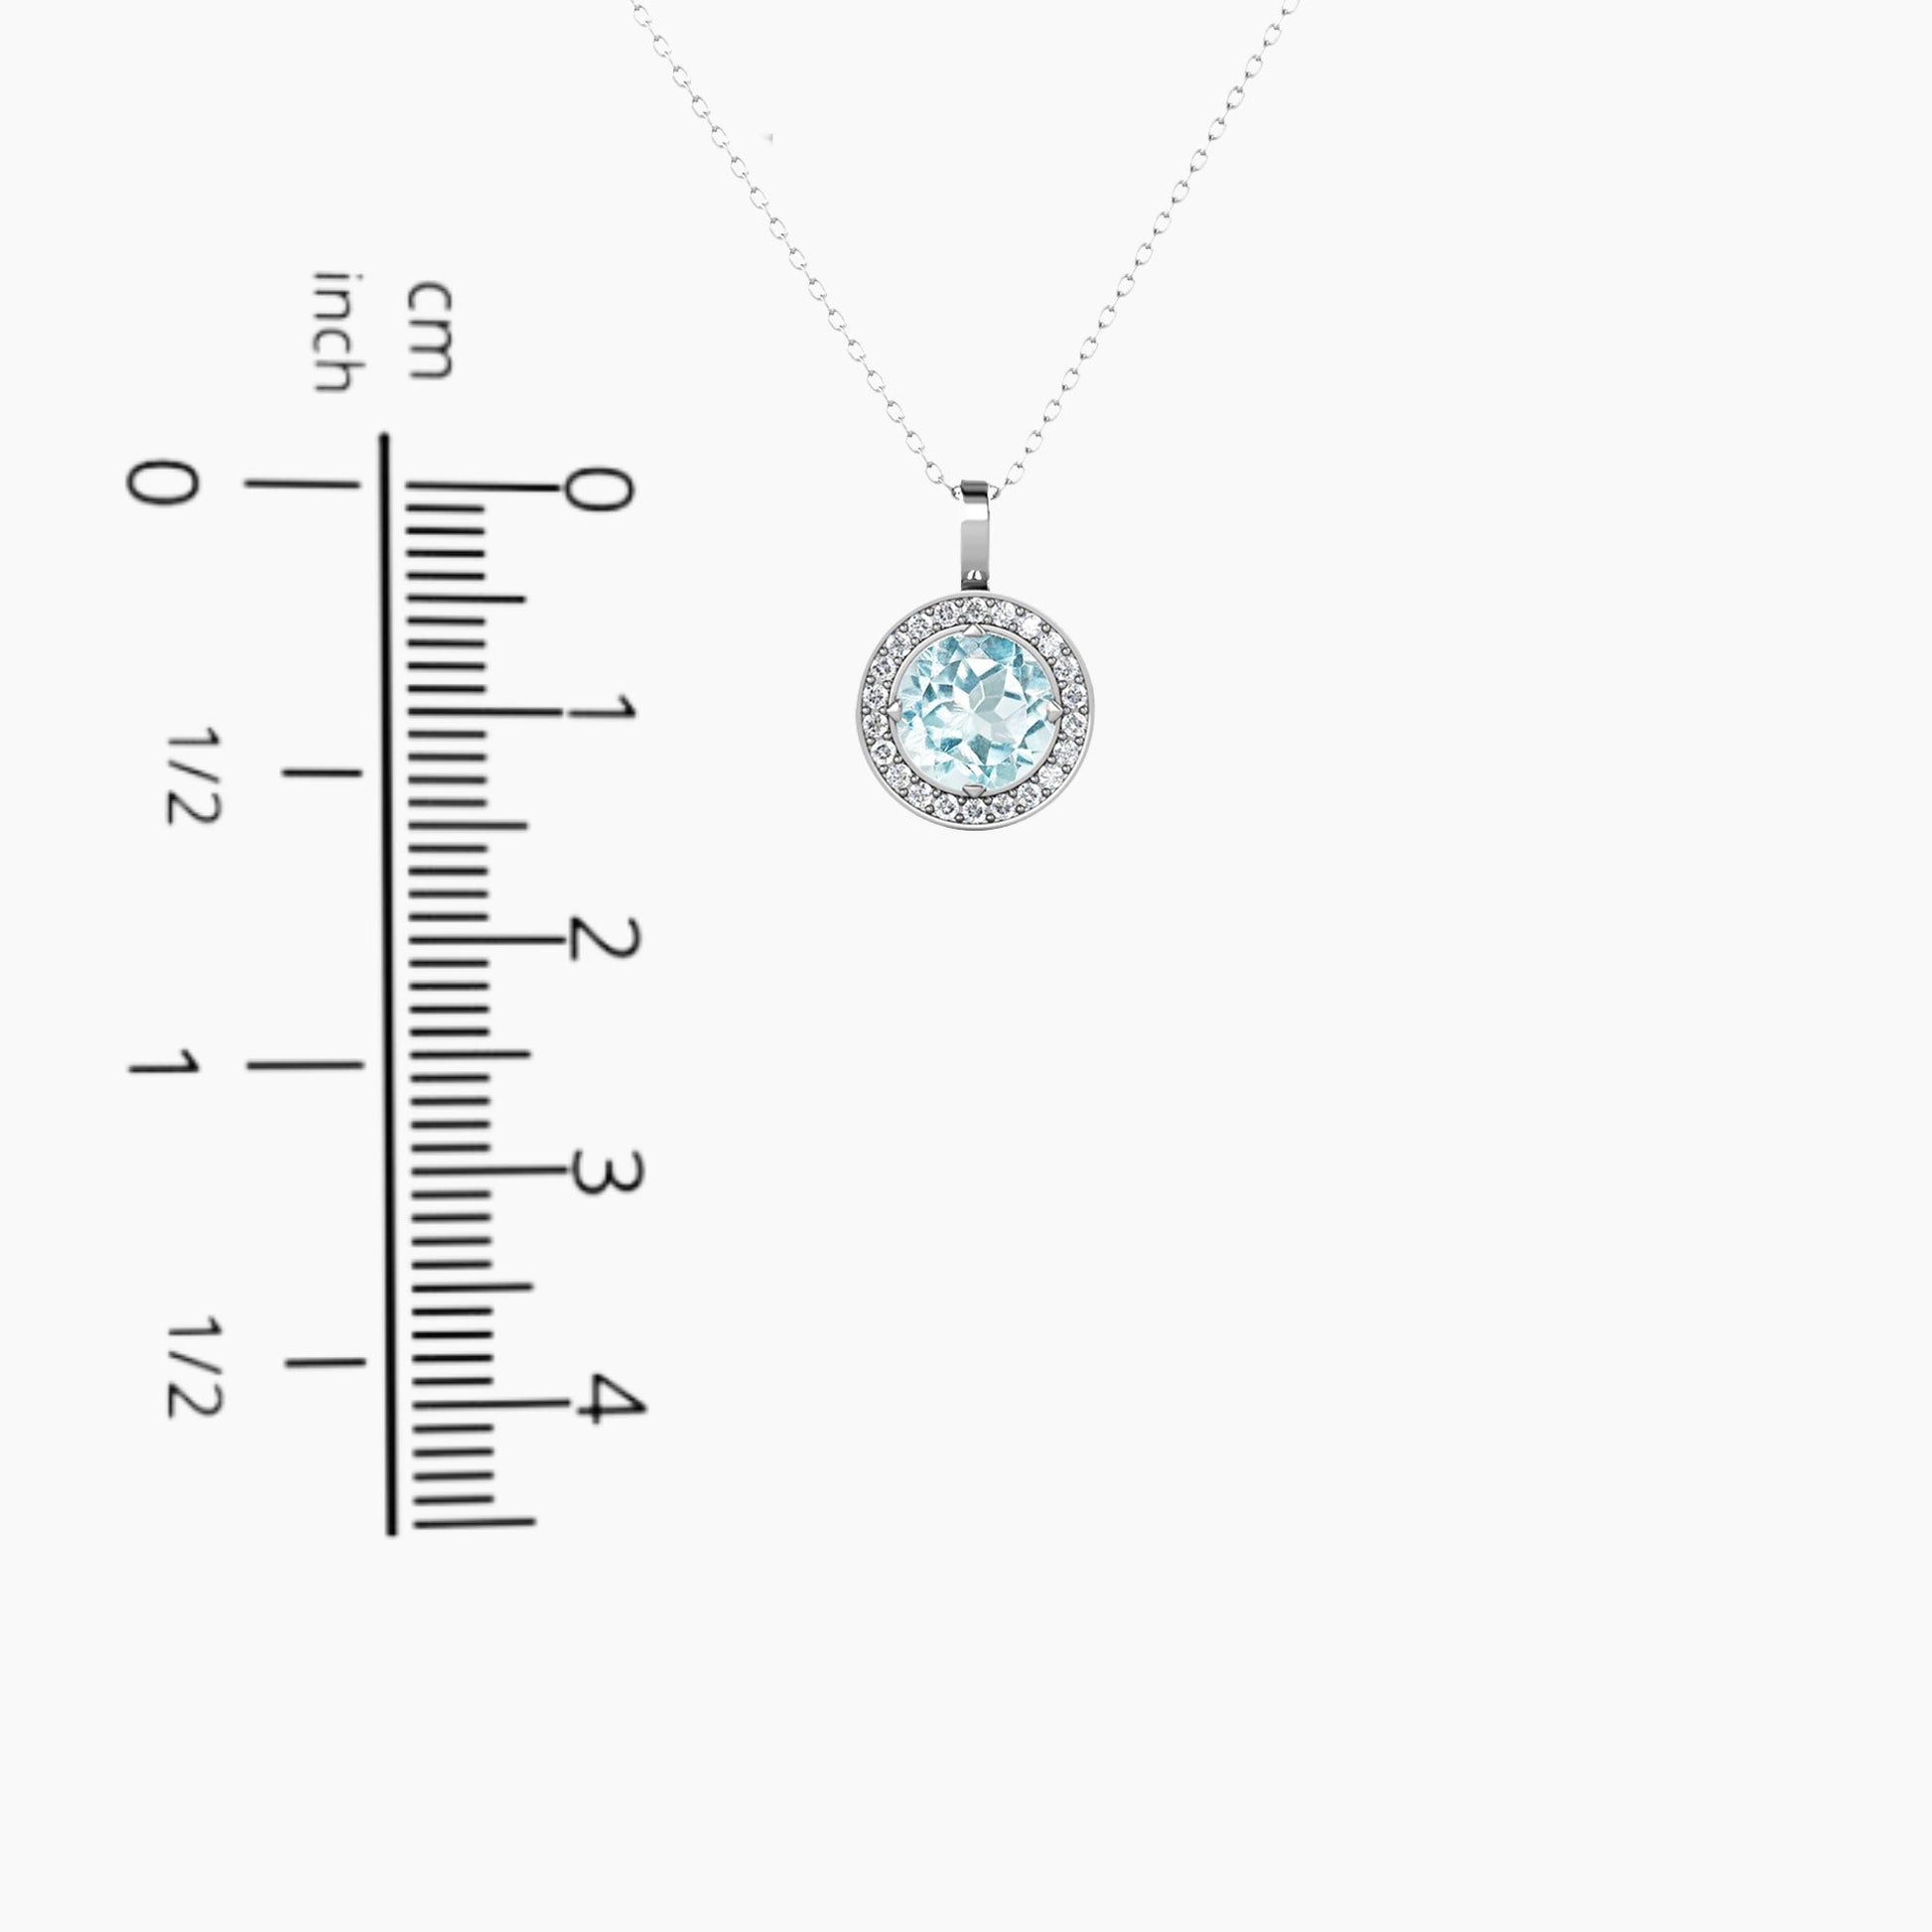 Irosk Round Topaz Pendant with Halo displayed next to a scale for size comparison